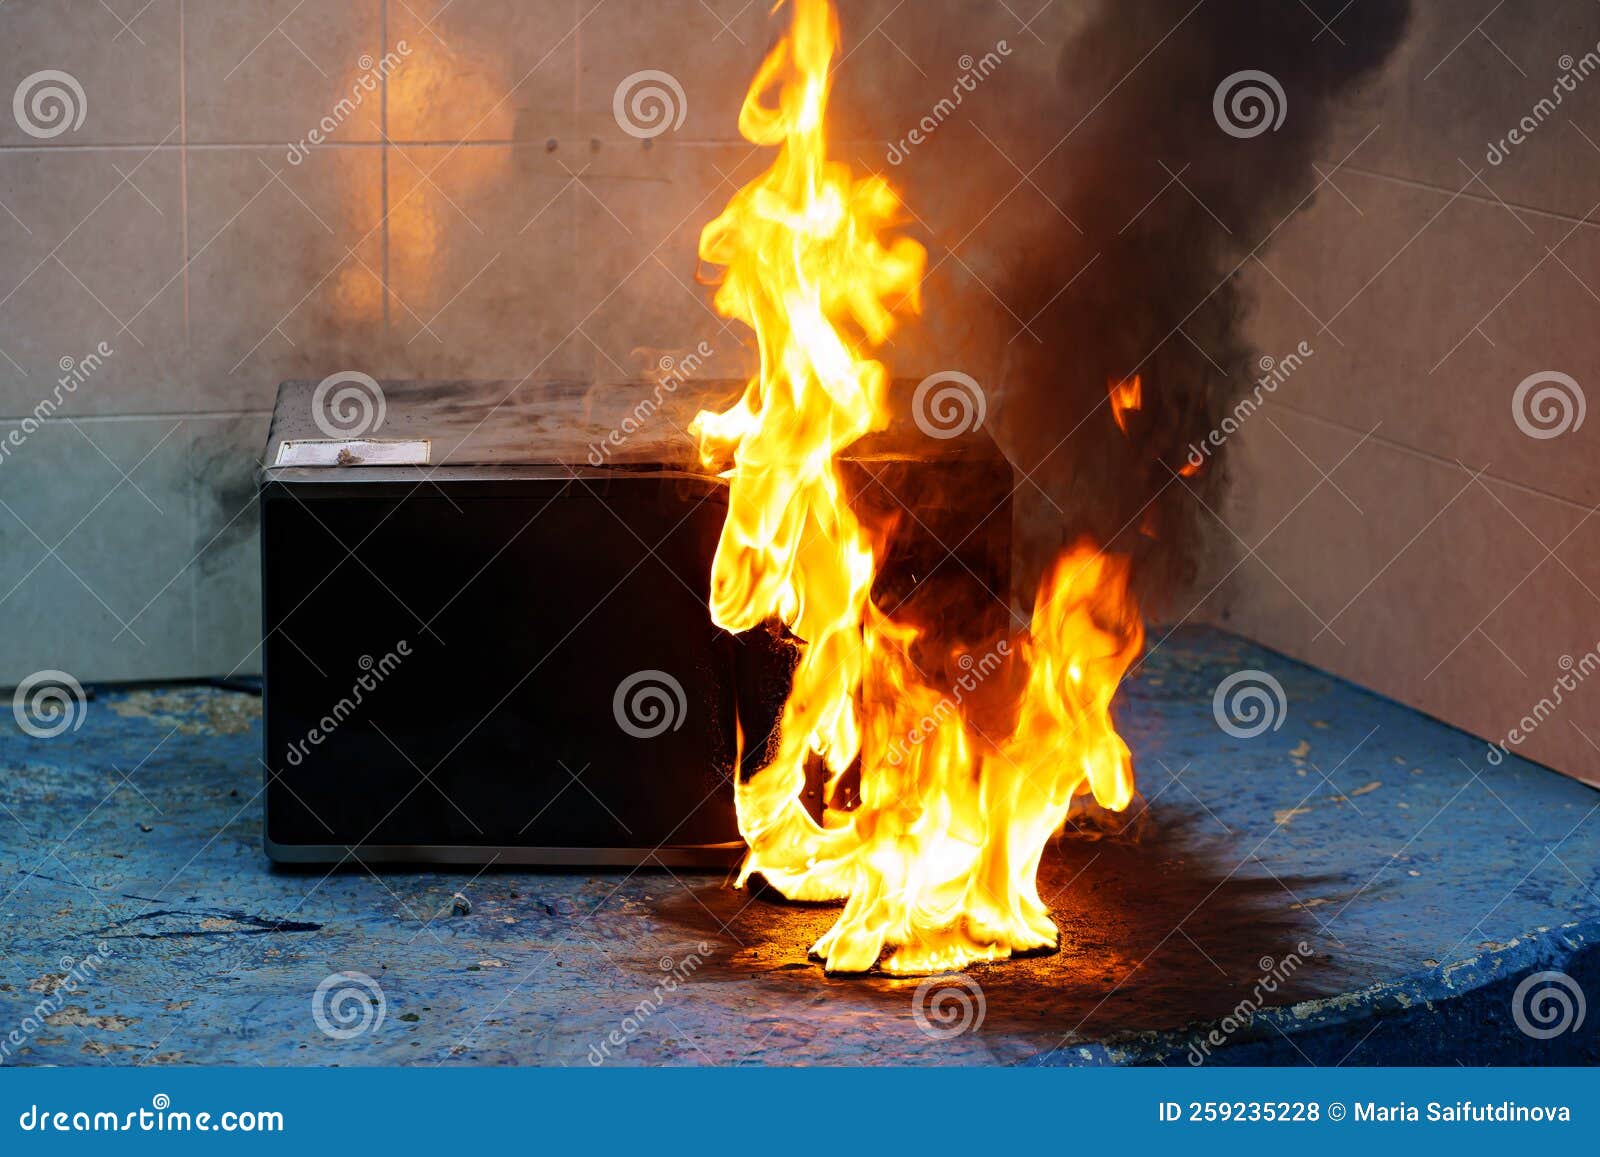 Microwave Oven on Fire. the Concept of Fire in the Kitchen. Stock